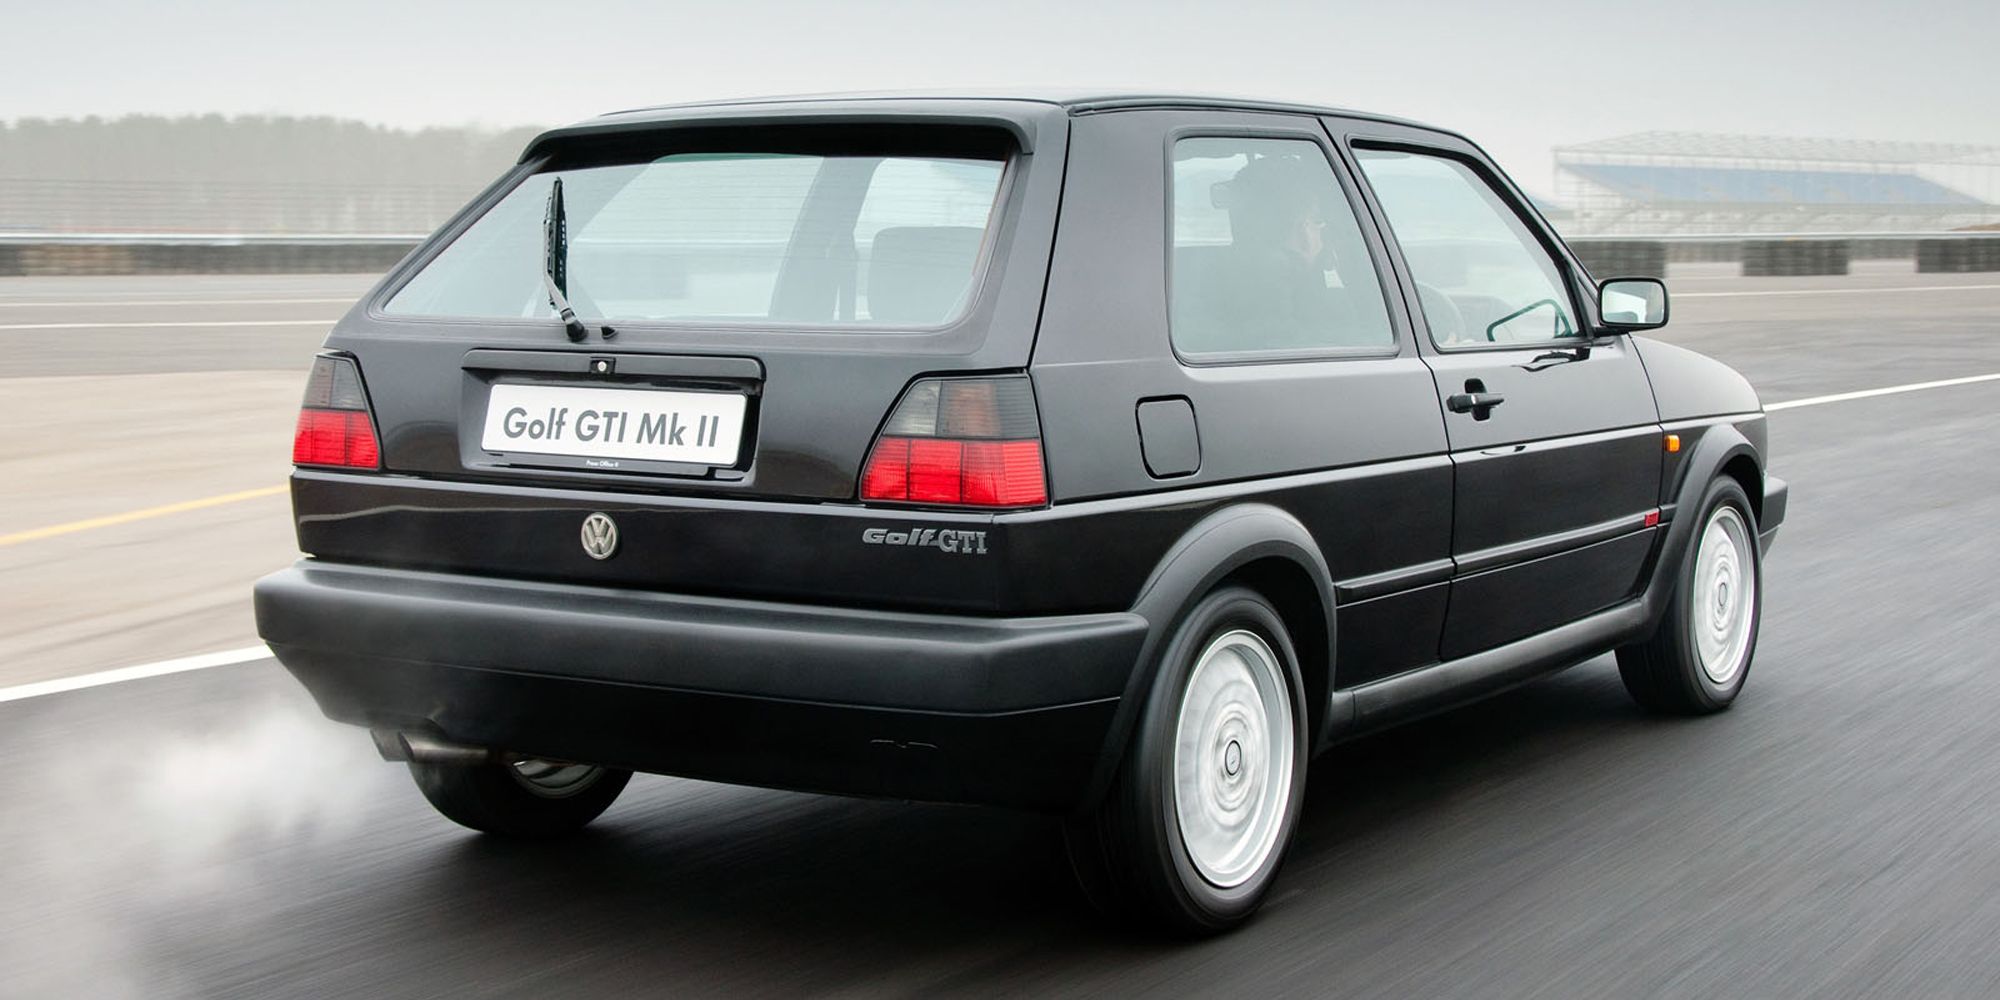 The rear of the Mk2 GTI on the move